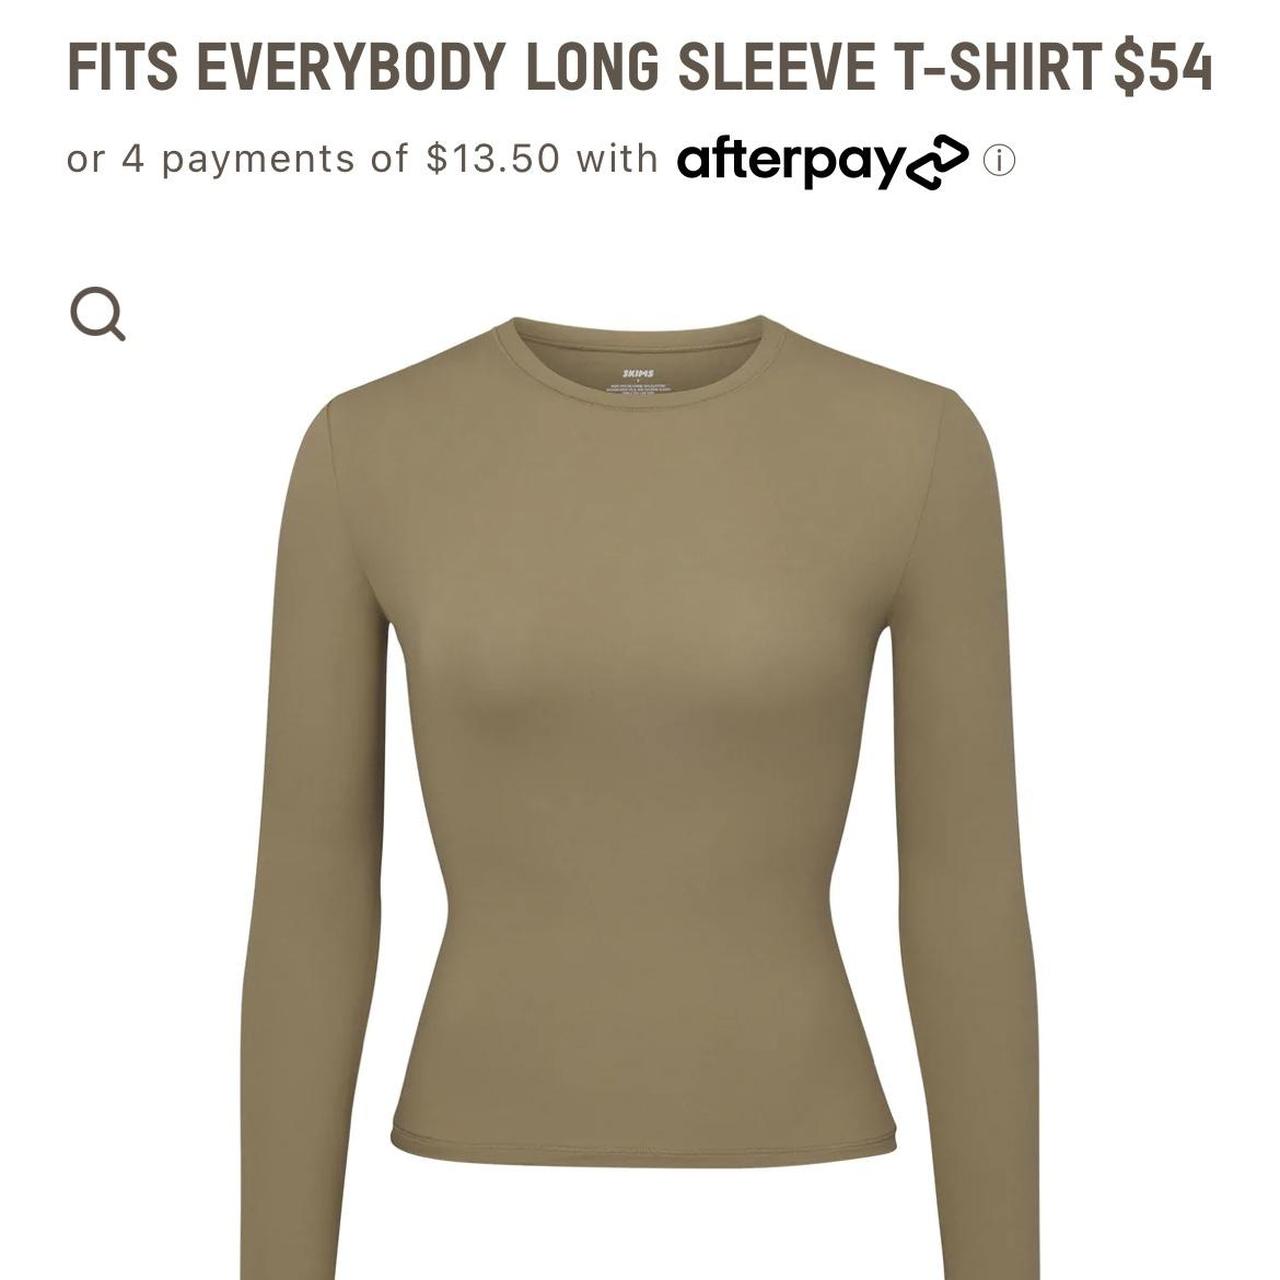 FITS EVERYBODY LONG SLEEVE T-SHIRT